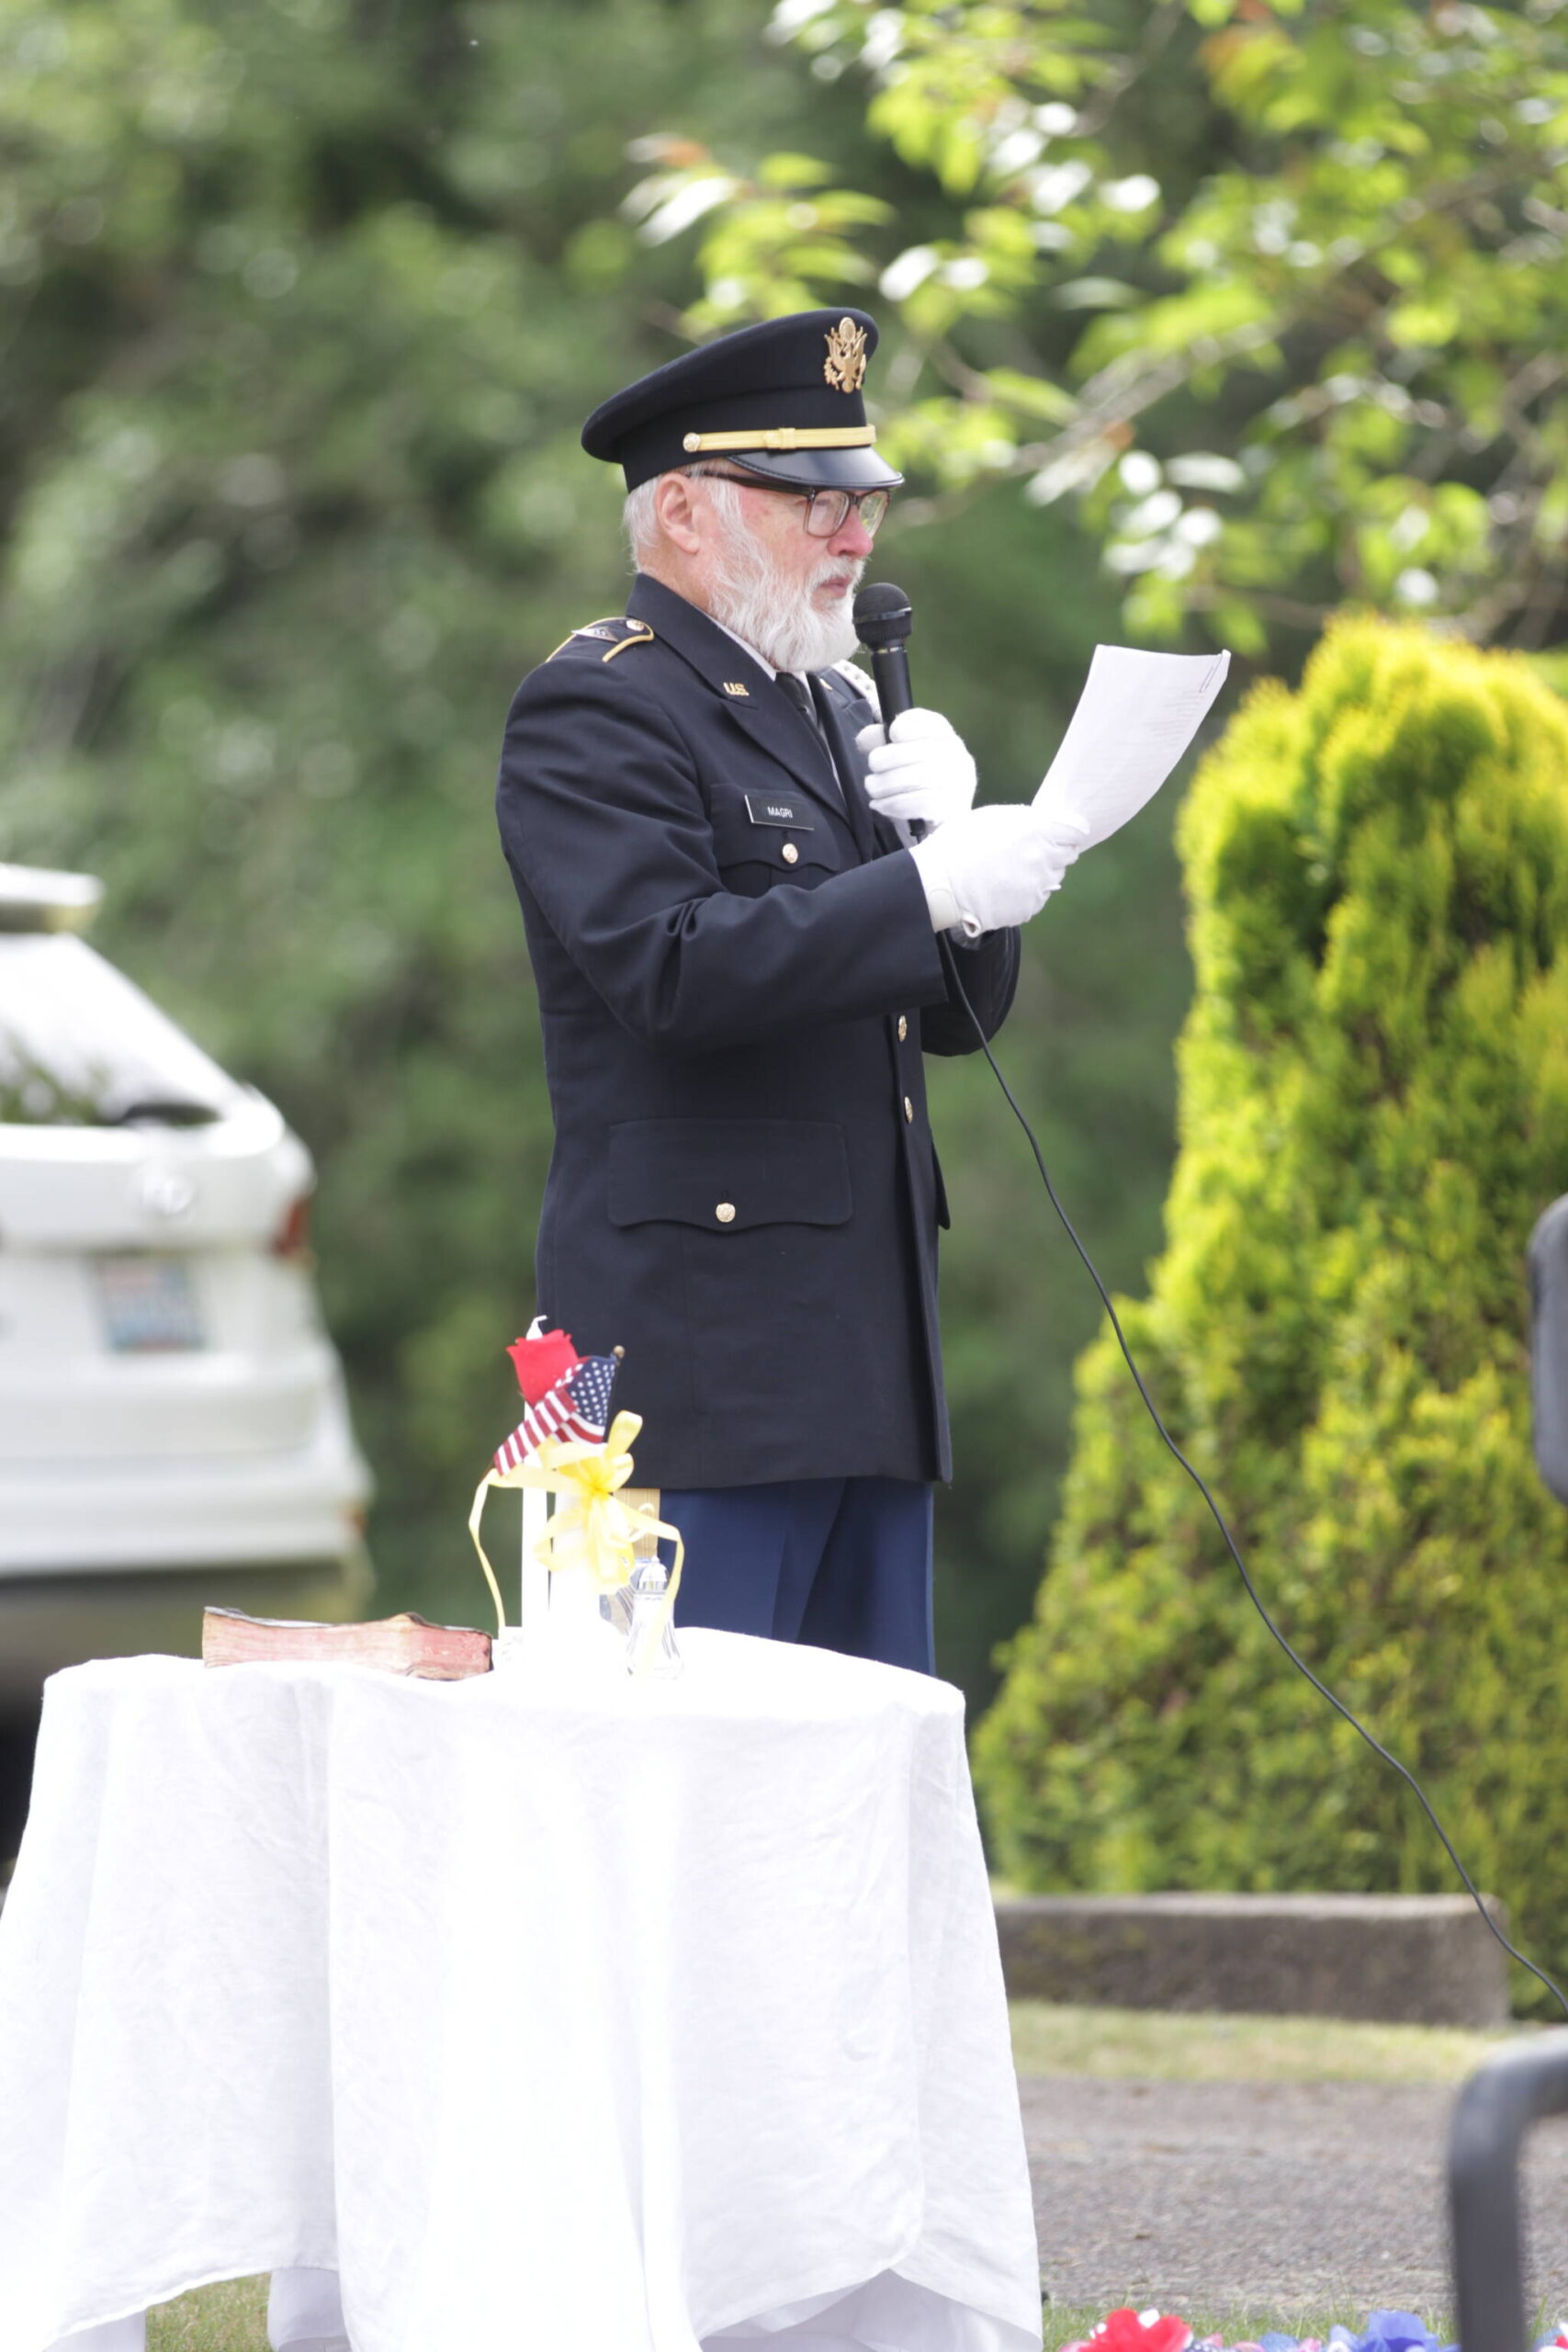 Veterans of Foreign Wars Post 224 post commander Anthony Magri delivers the address of the Missing Man Table during the Memorial Day Ceremony at Fern Hill Cemetery on May 29. (Michael S. Lockett / The Daily World)